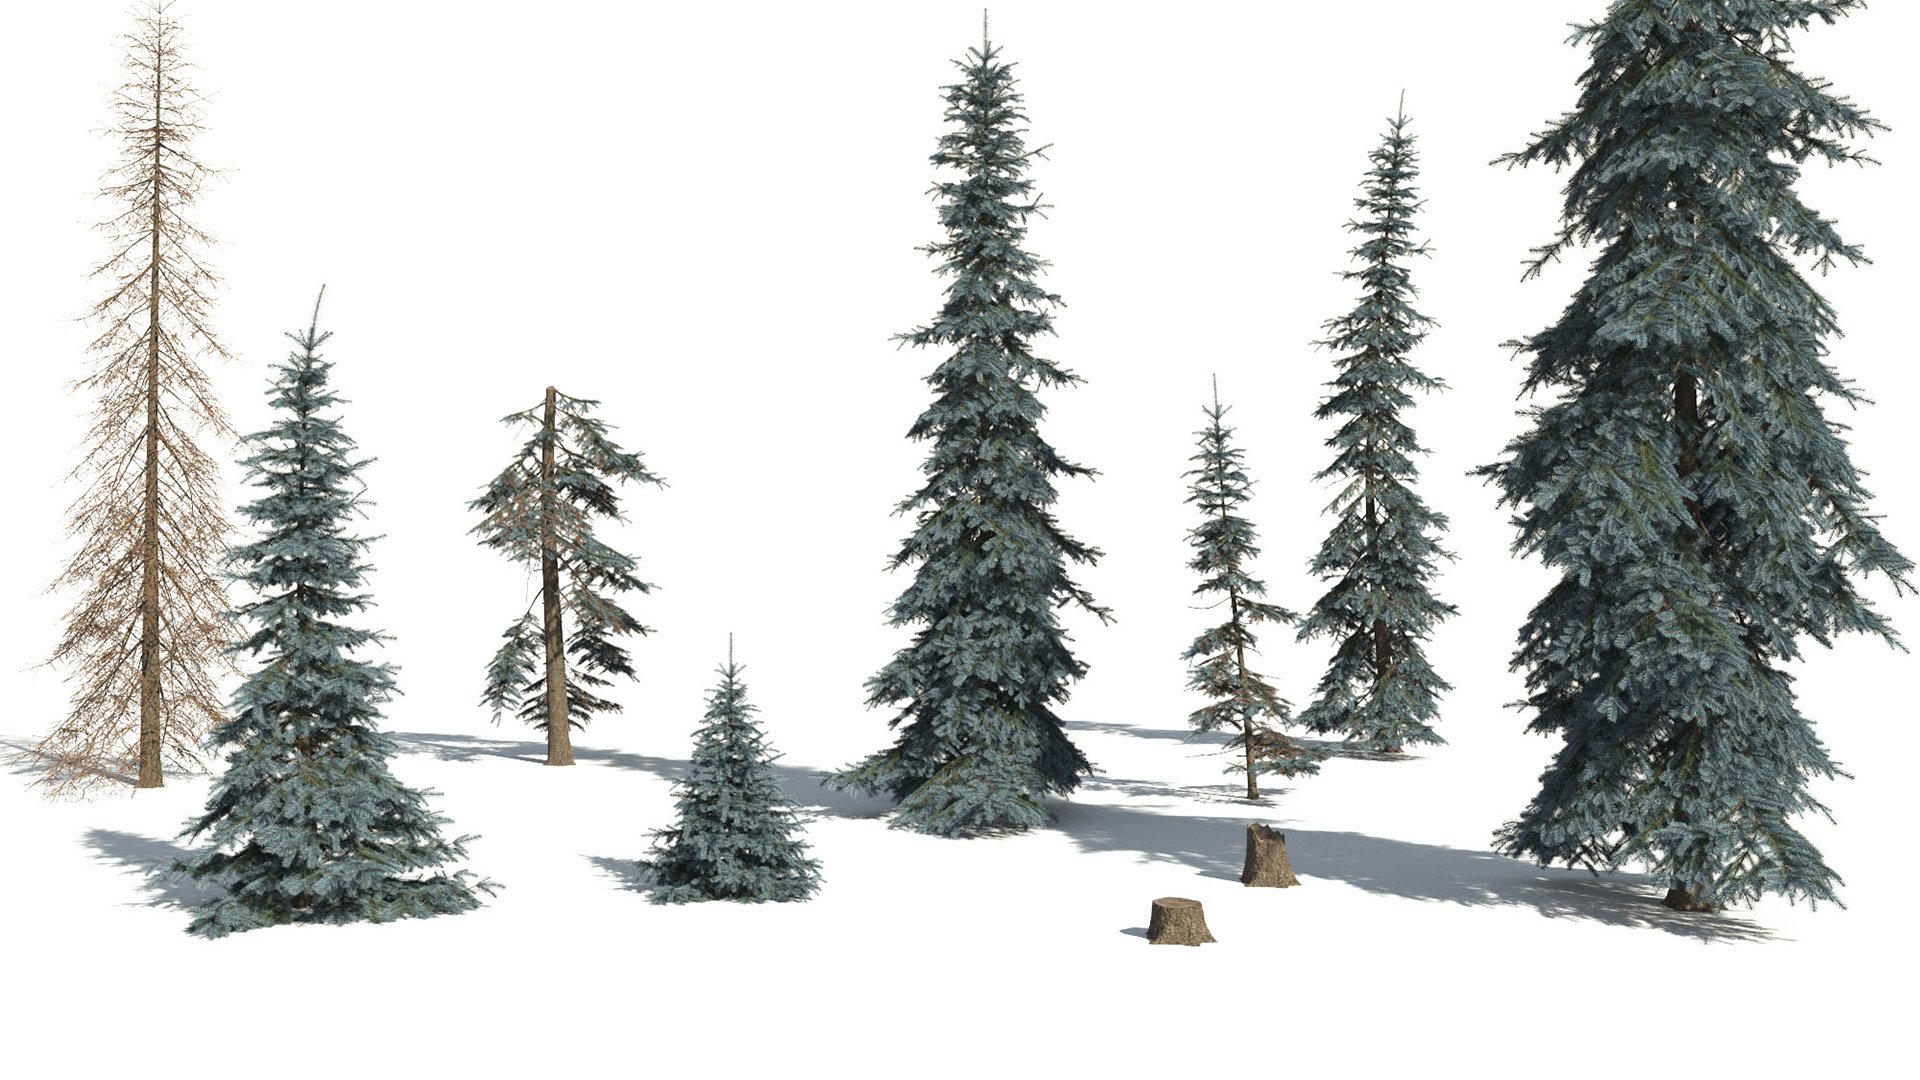 3D model of the Colorado Blue spruce Koster Picea pungens 'Koster' different presets